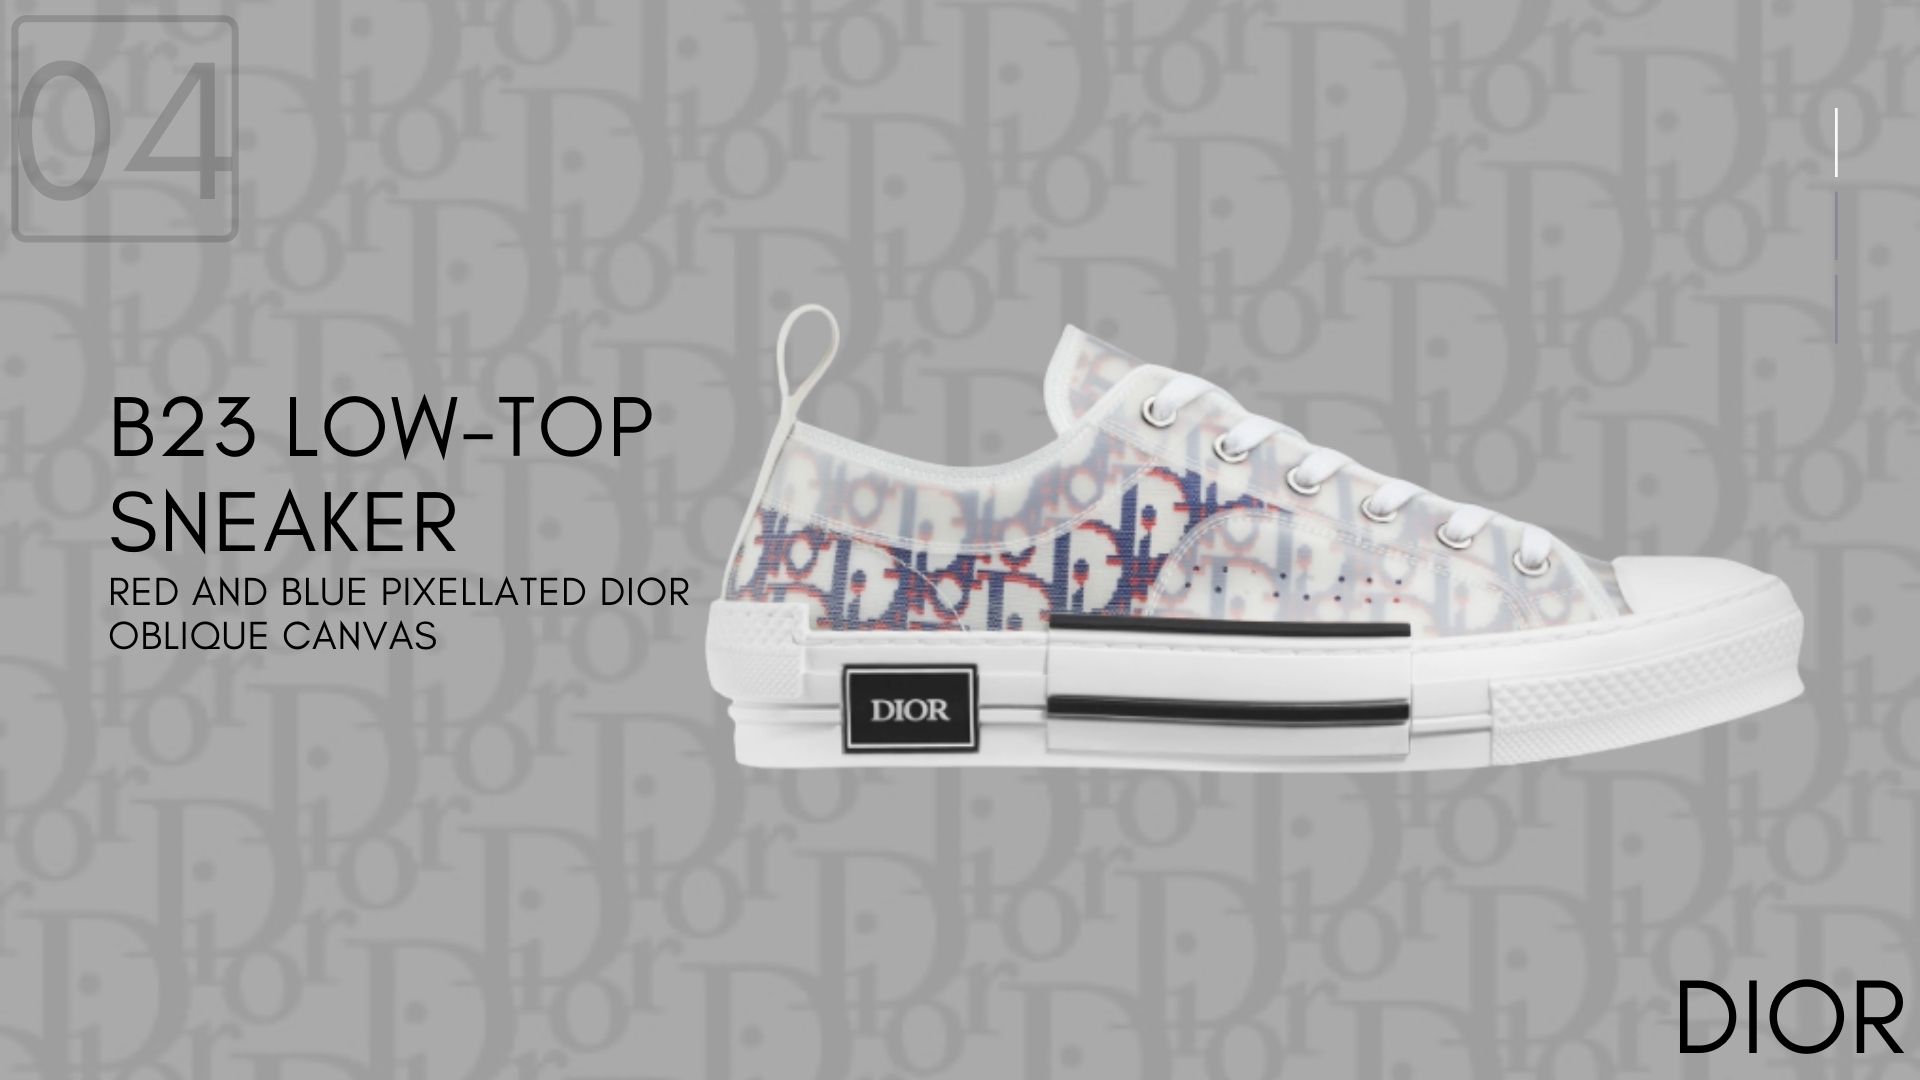 B23 LOW-TOP Red and Blue Pixellated Dior Oblique Canvas-Dior Sneakers-รองเท้าดิออร์-10 dior sneakers-dior 10 sneakers